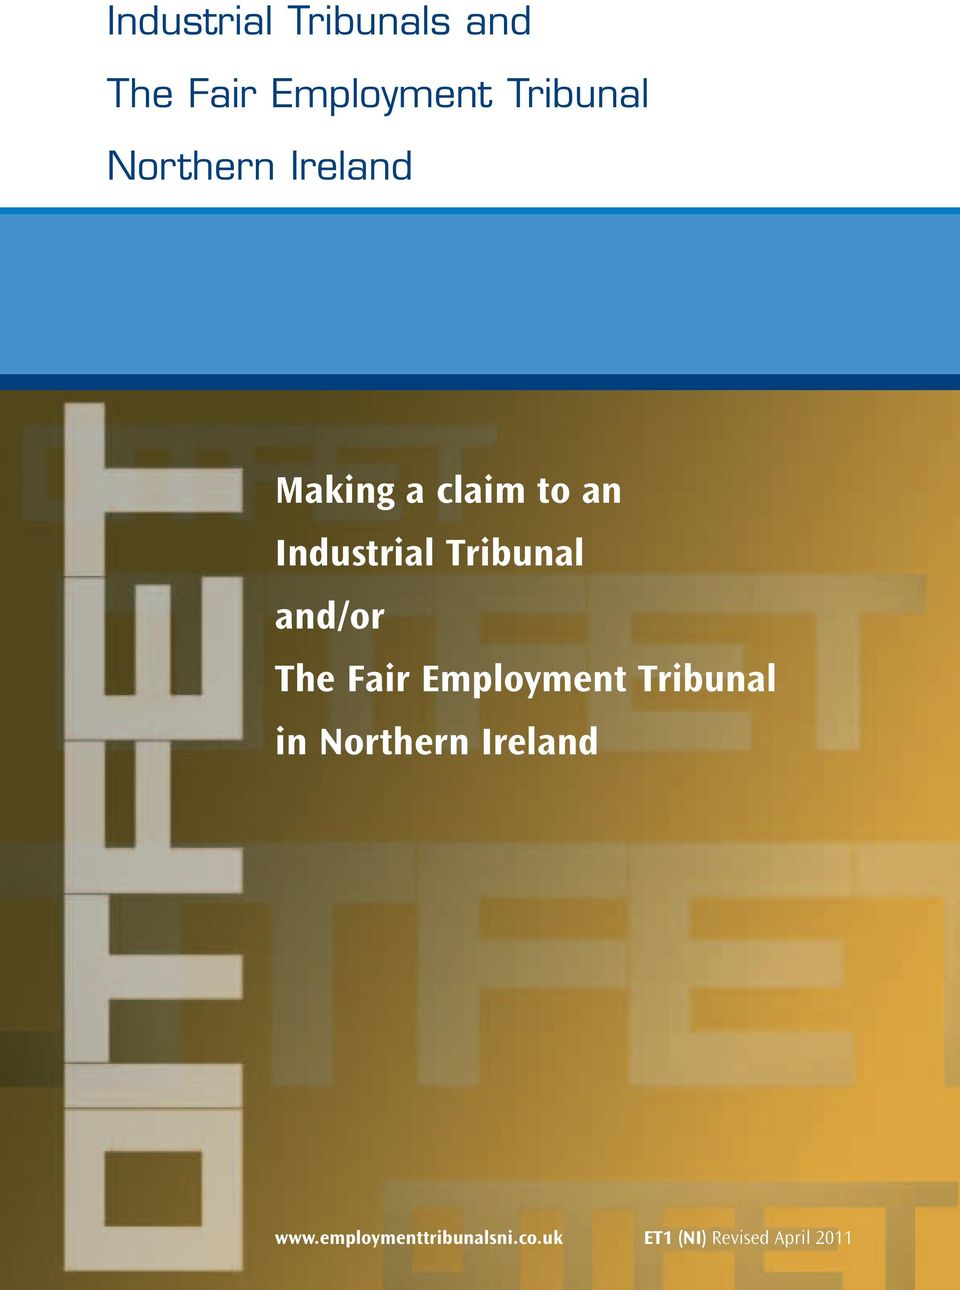 Tribunal and/or The Fair Employment Tribunal in Northern